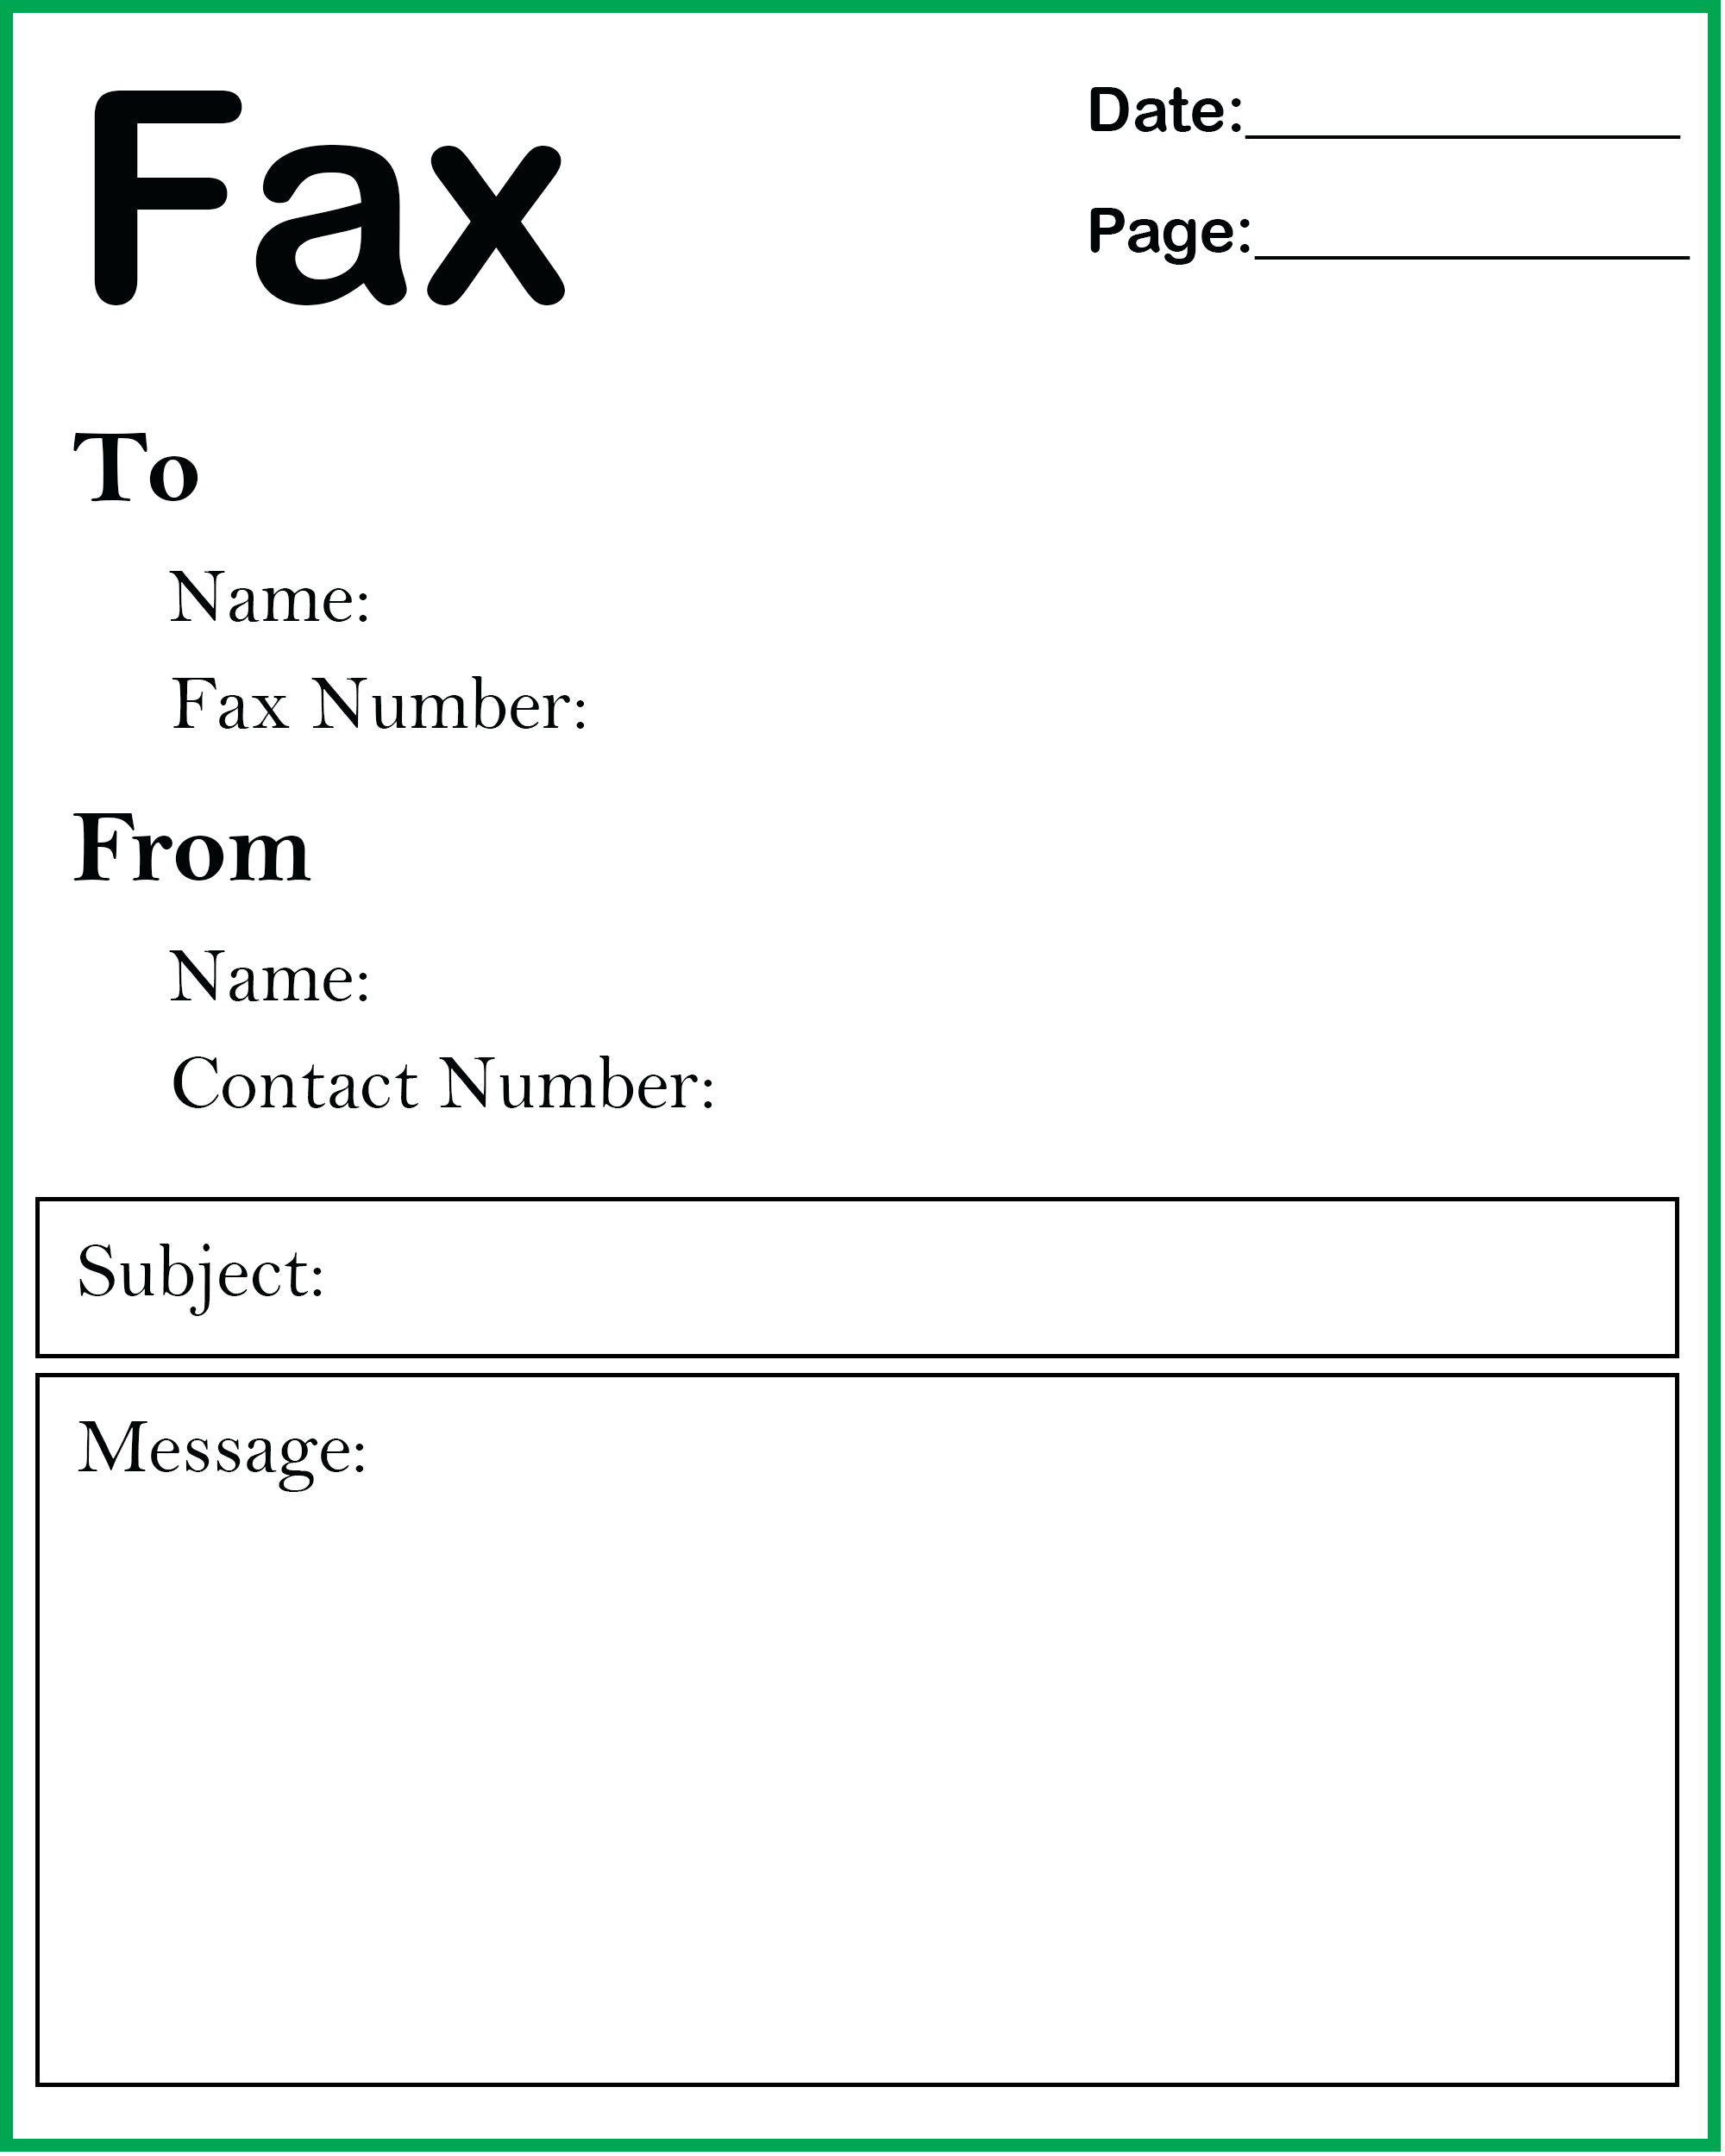 free-basic-fax-cover-sheet-template-pdf-word-fax-cover-sheet